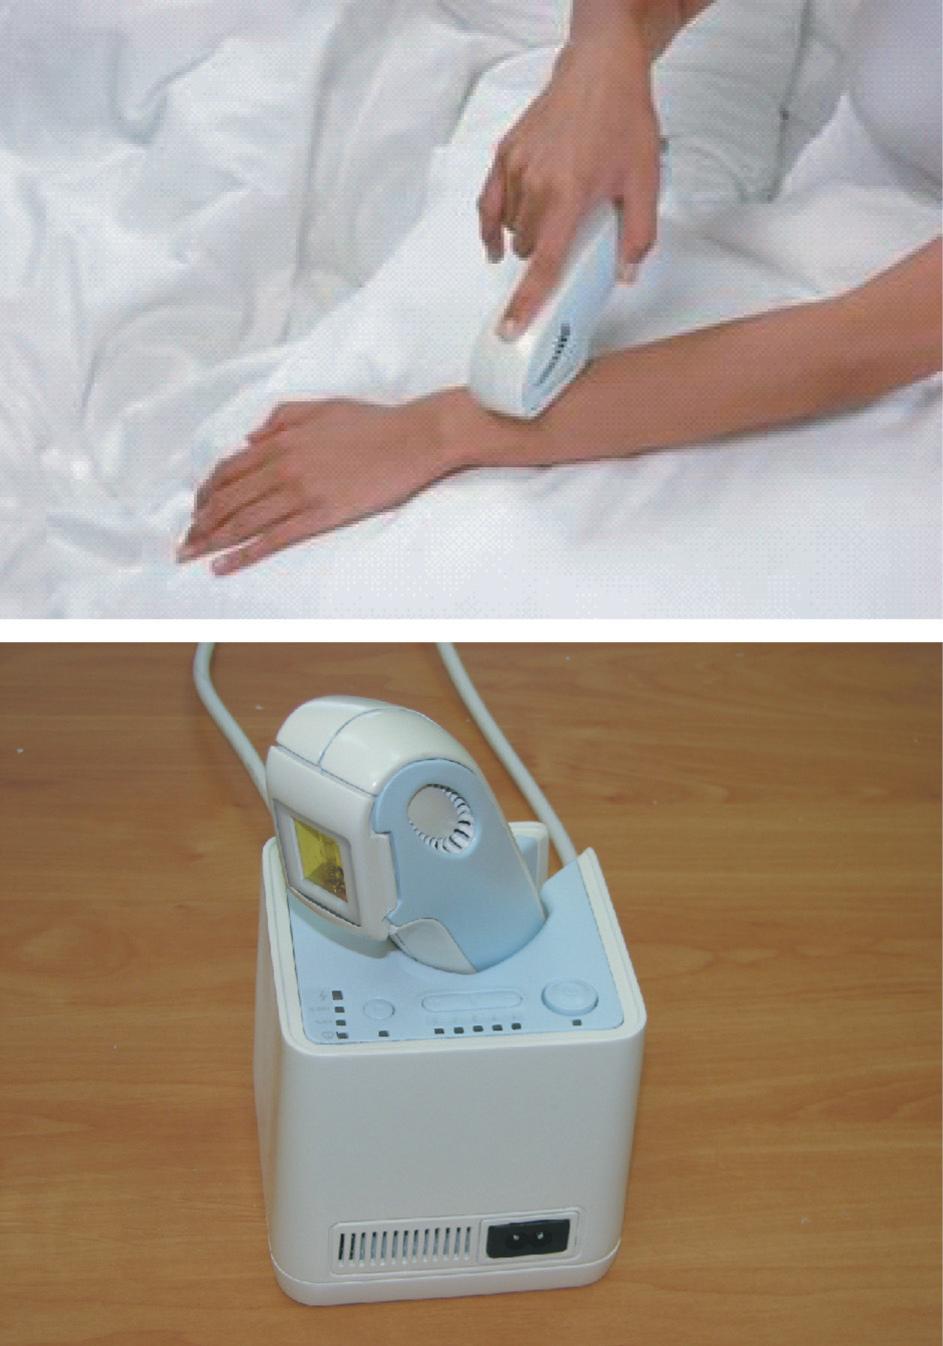 Silk n A novel device for hair removal at home 107 ranges between 50% and 75% reduction after a series of treatments (6 8). The disadvantages of in-office-based laser/light hair removal include: 1.